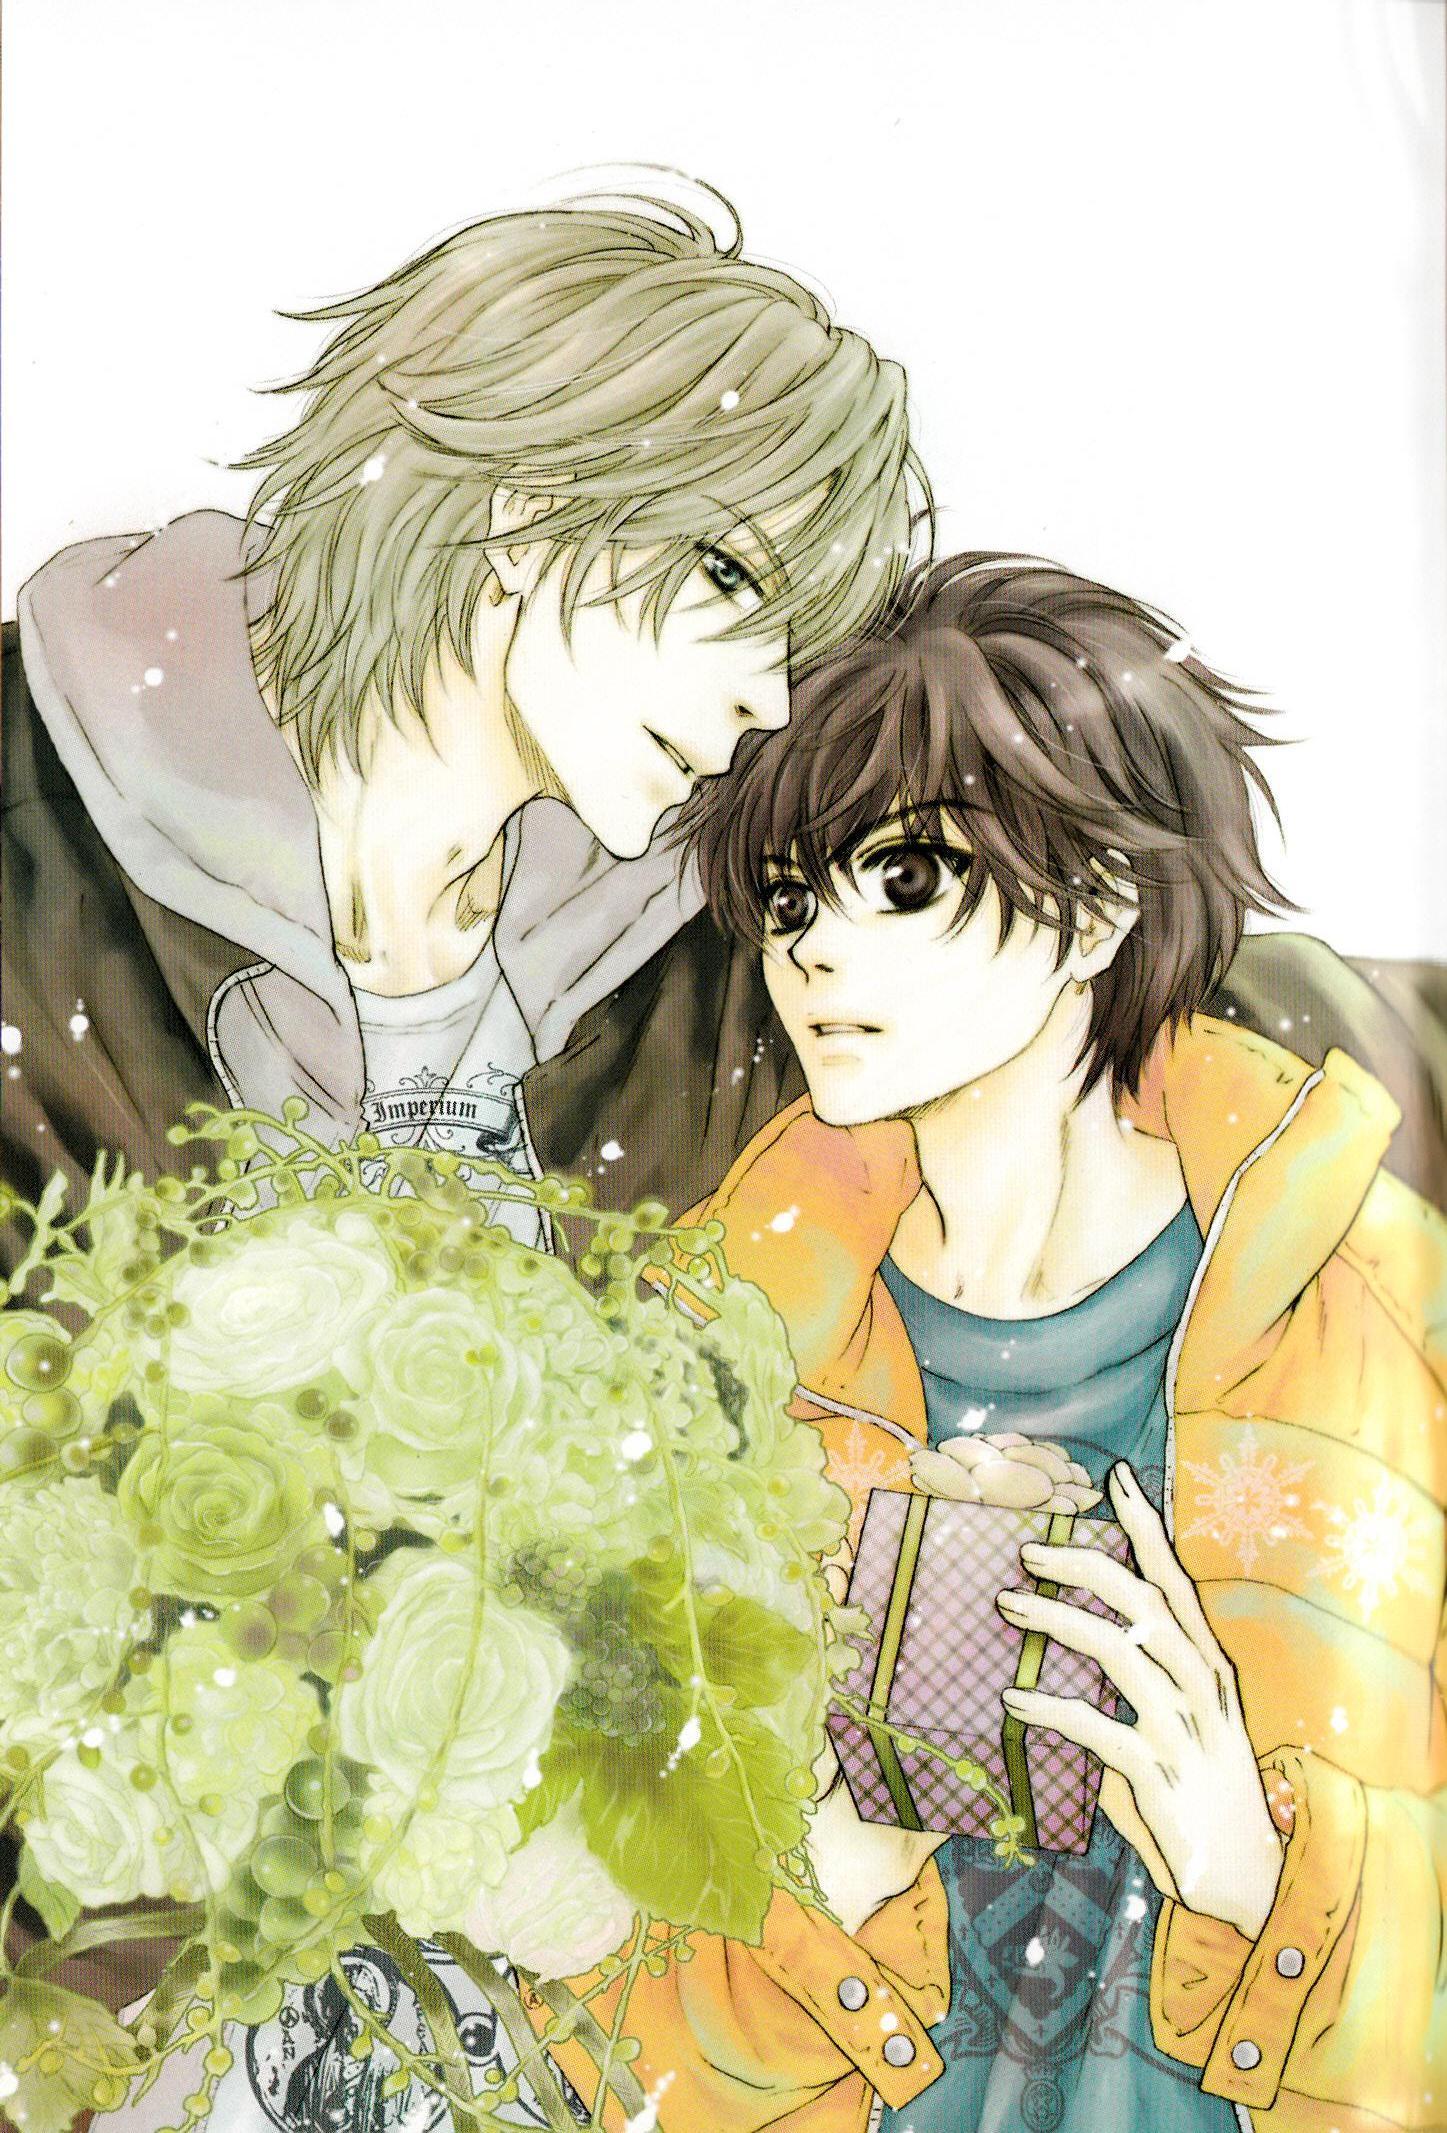 How old is Ren in the Super Lovers anime What is the age gap between him  and Haru  Leo Sigh